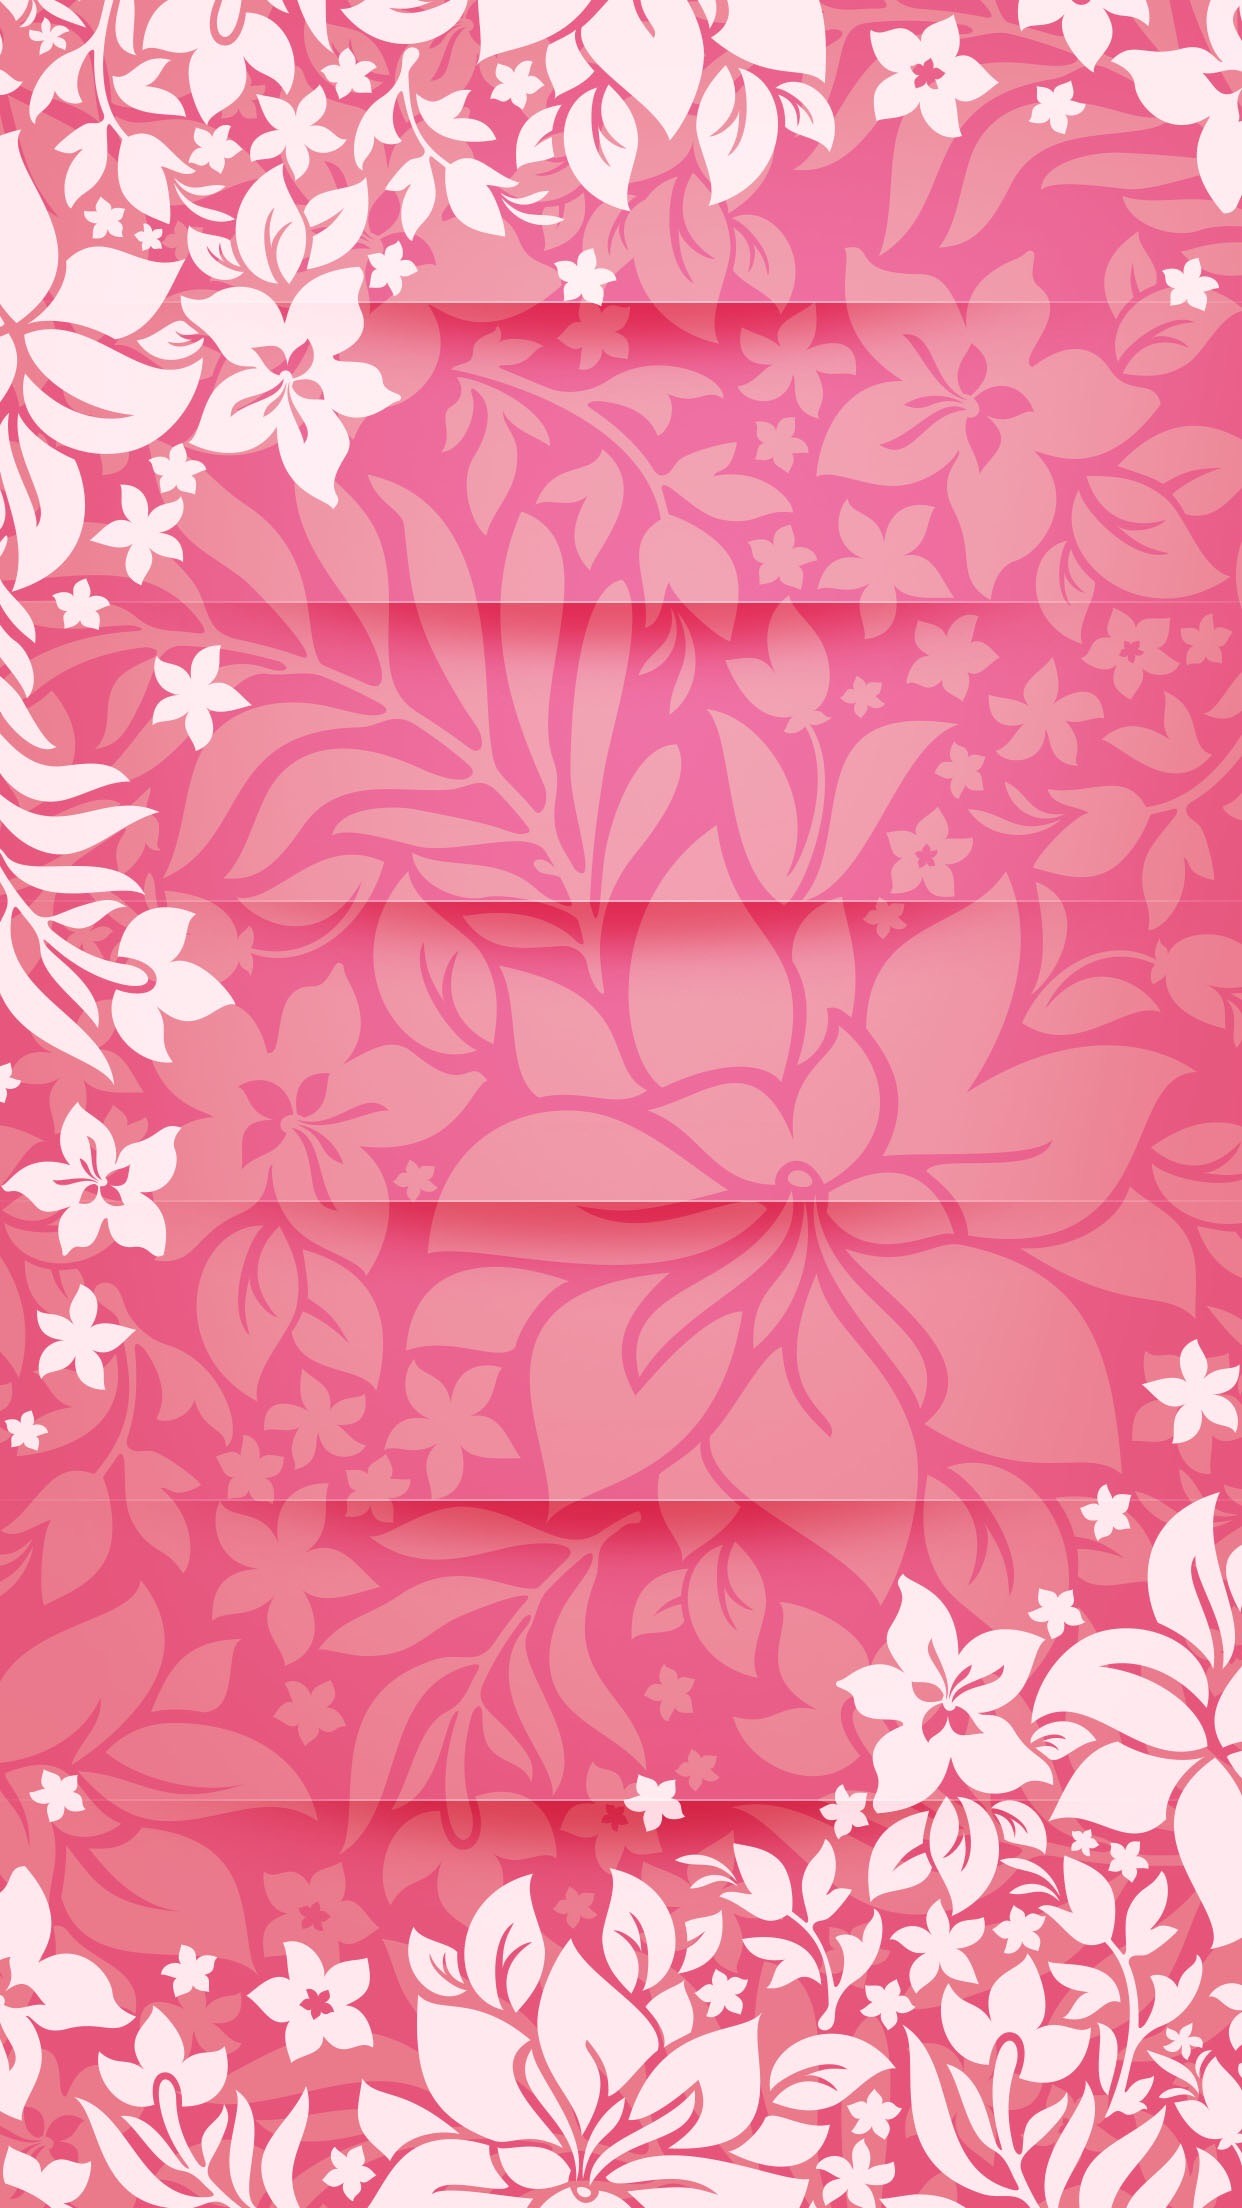 53 Girly Girl Wallpapers Backgrounds